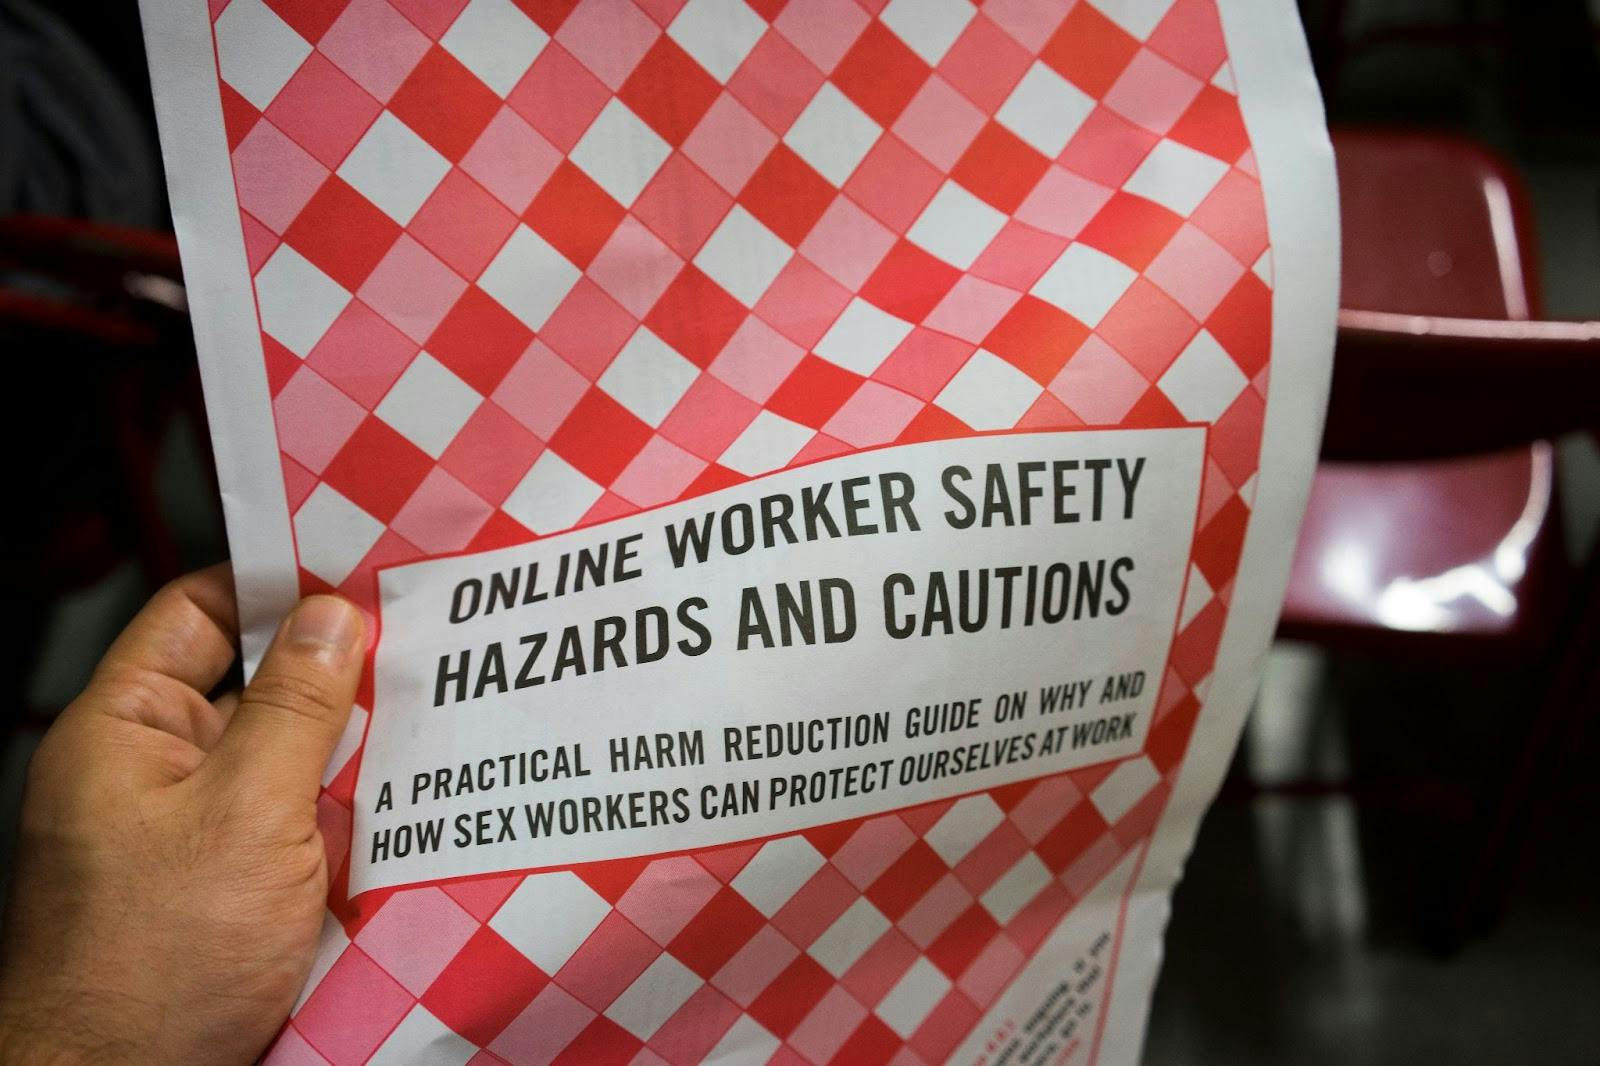 A flyer that reads, "Online worker safety hazards and cautions: A practical harm reduction guide on why and how sex workers can protect ourselves at work."